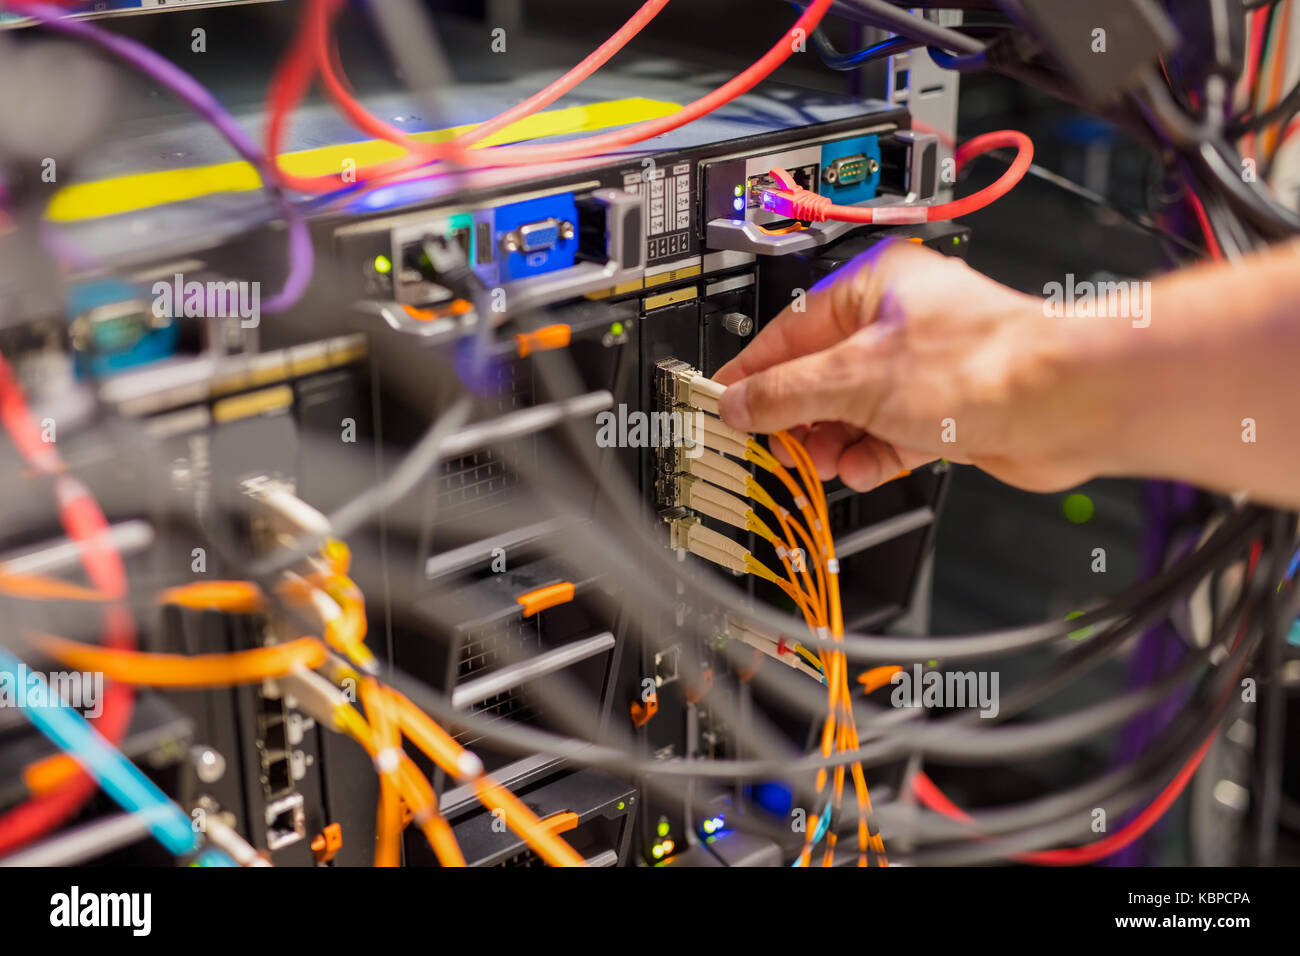 IT Consultant Connecting Network Cable Into Switch Stock Photo